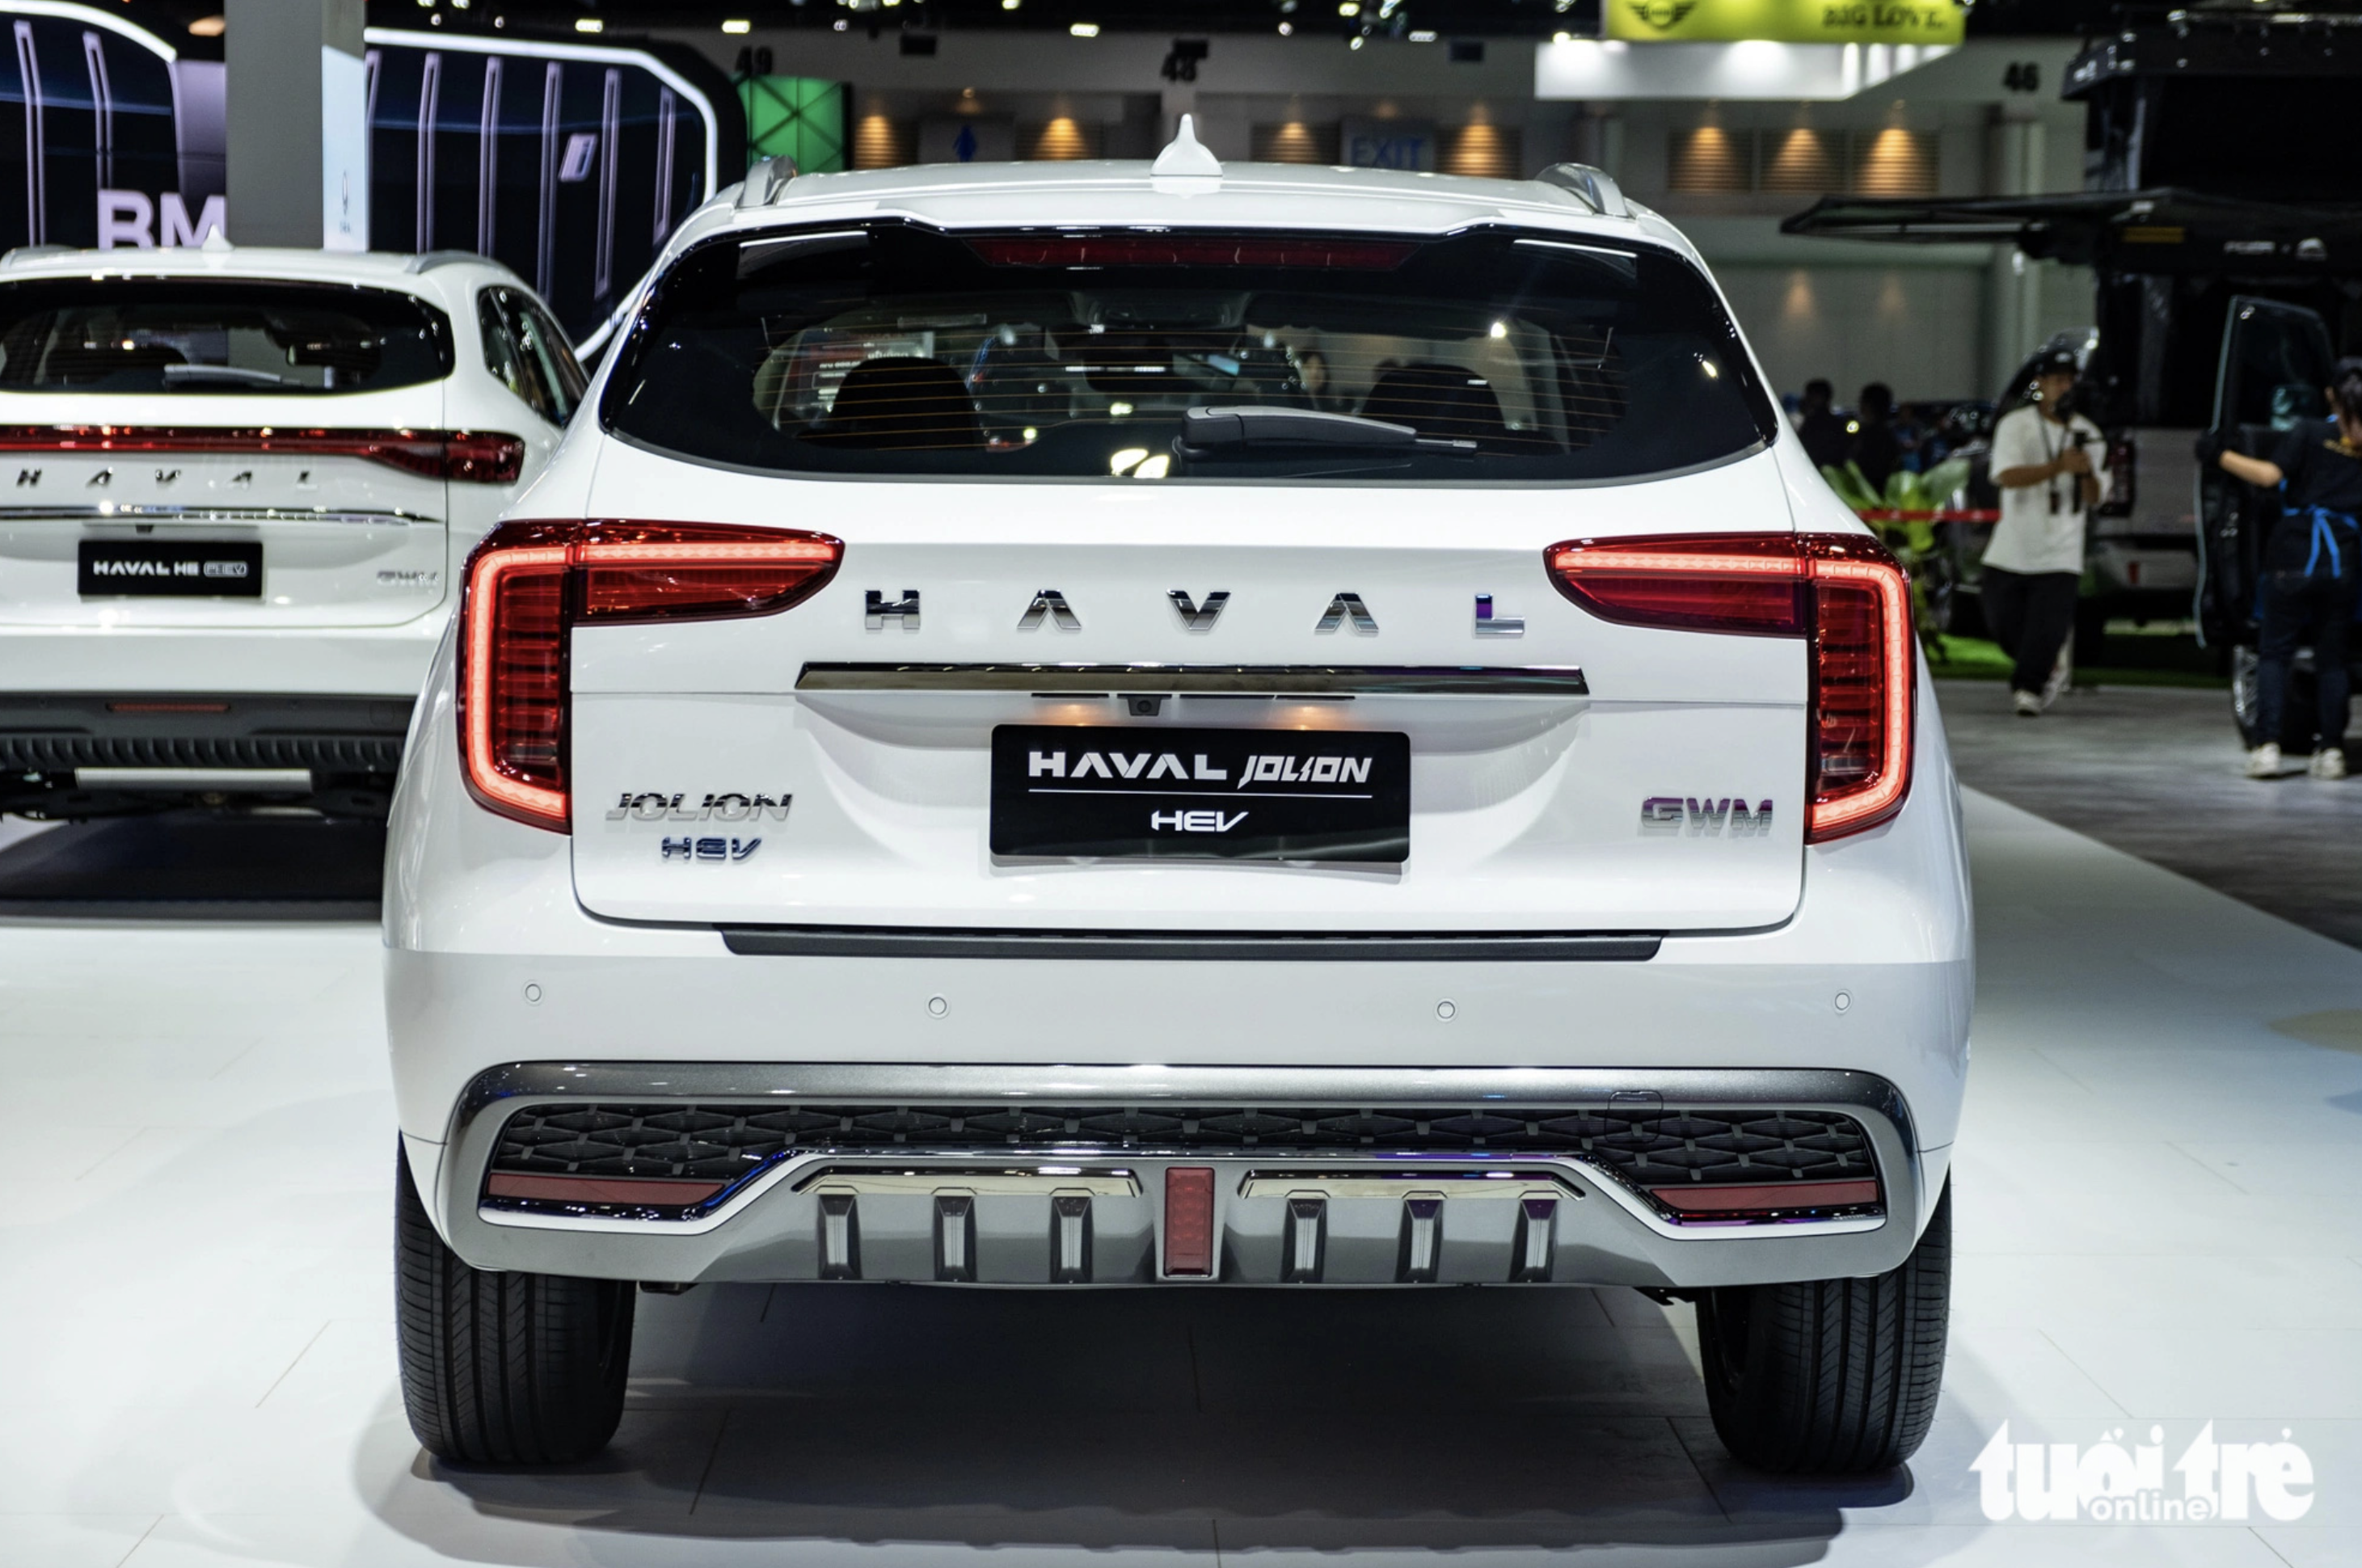 Some dealerships in Vietnam have started to receive deposits on the Haval Jolion at a price of less than VND700 million ($28,050) each. Photo: Quoc Minh / Tuoi Tre